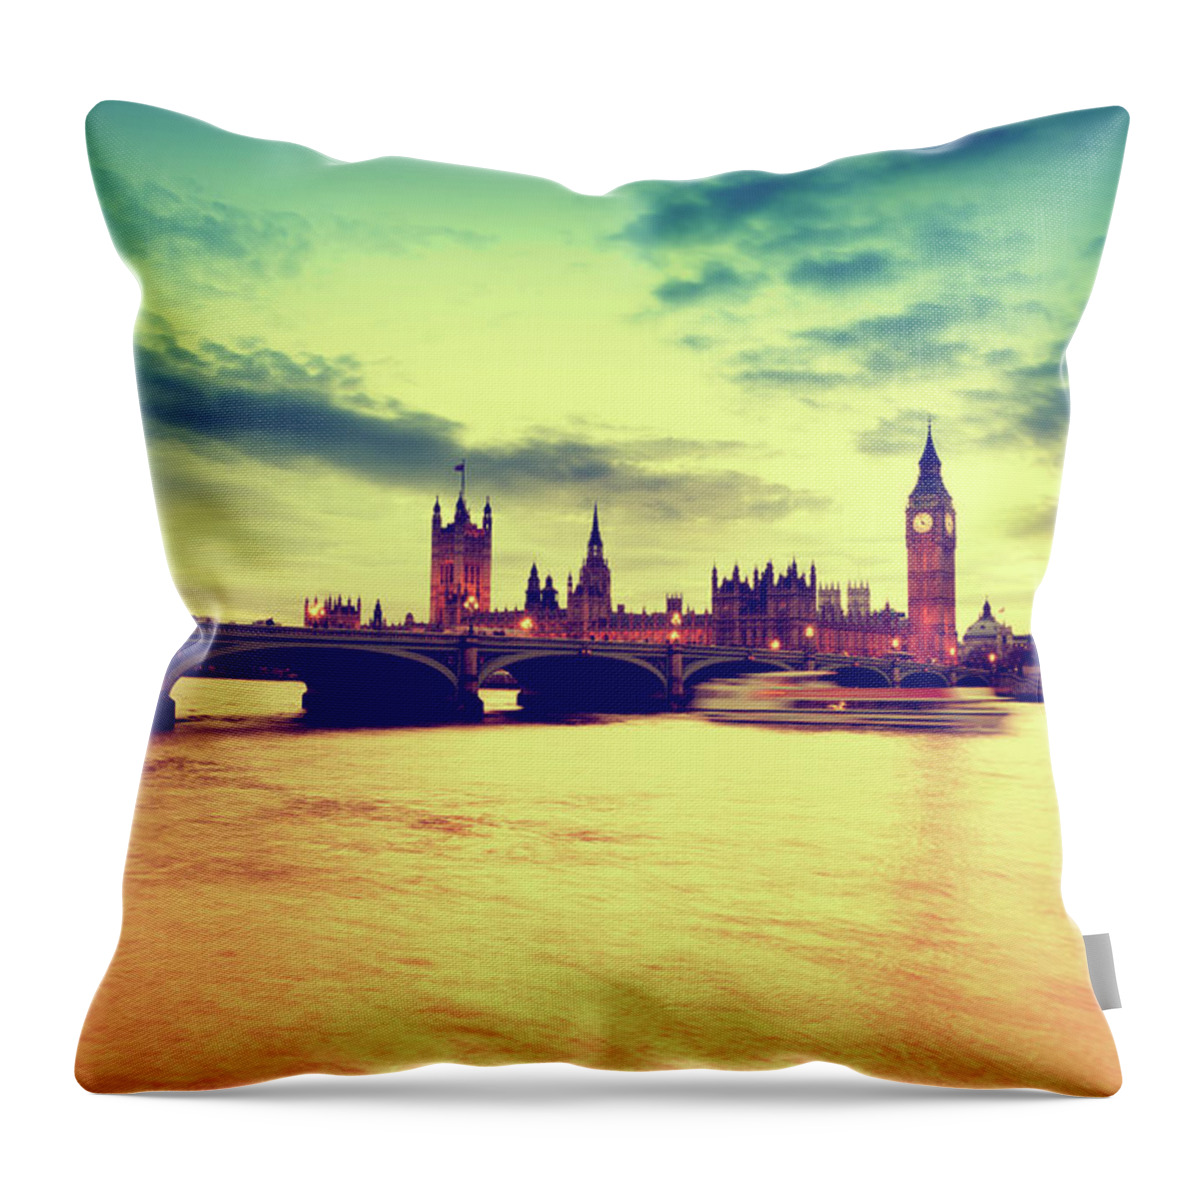 Clock Tower Throw Pillow featuring the photograph London City by Martin-dm